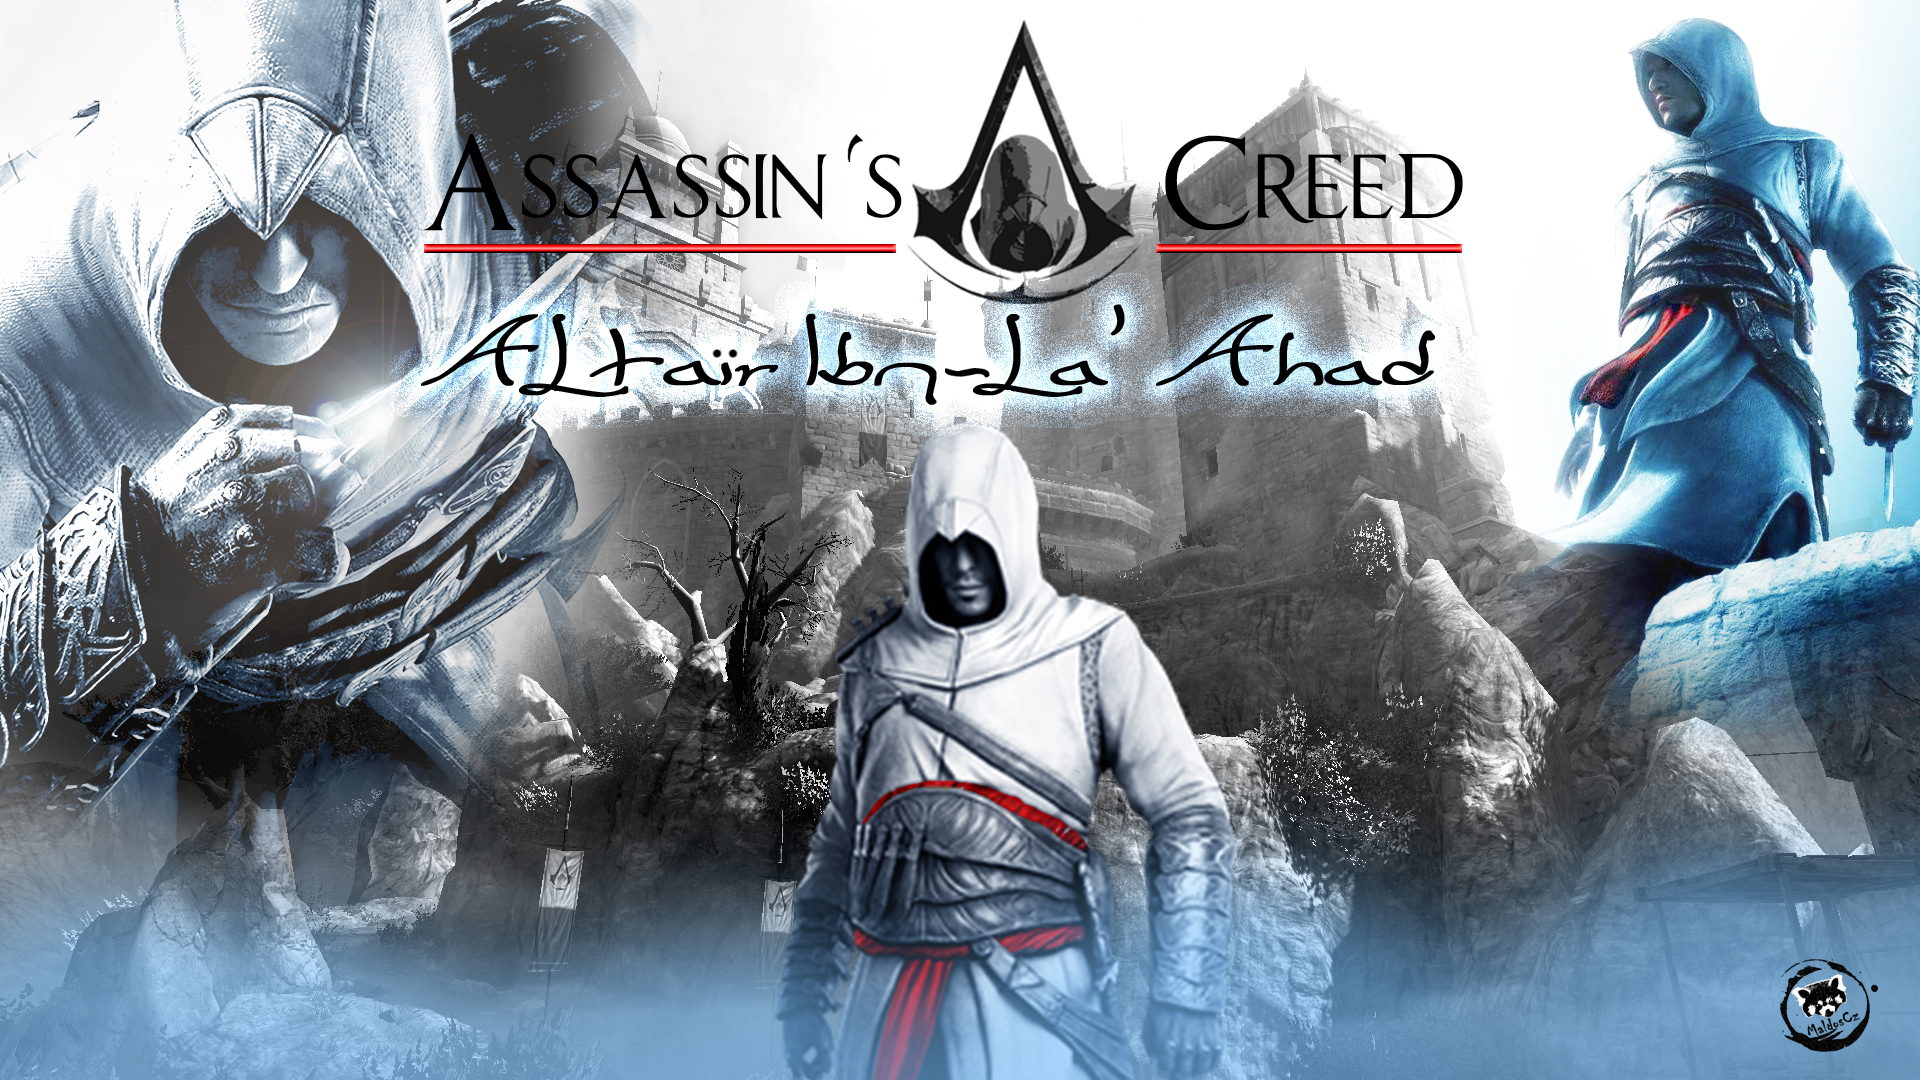 About Us - Assassin's Creed , HD Wallpaper & Backgrounds